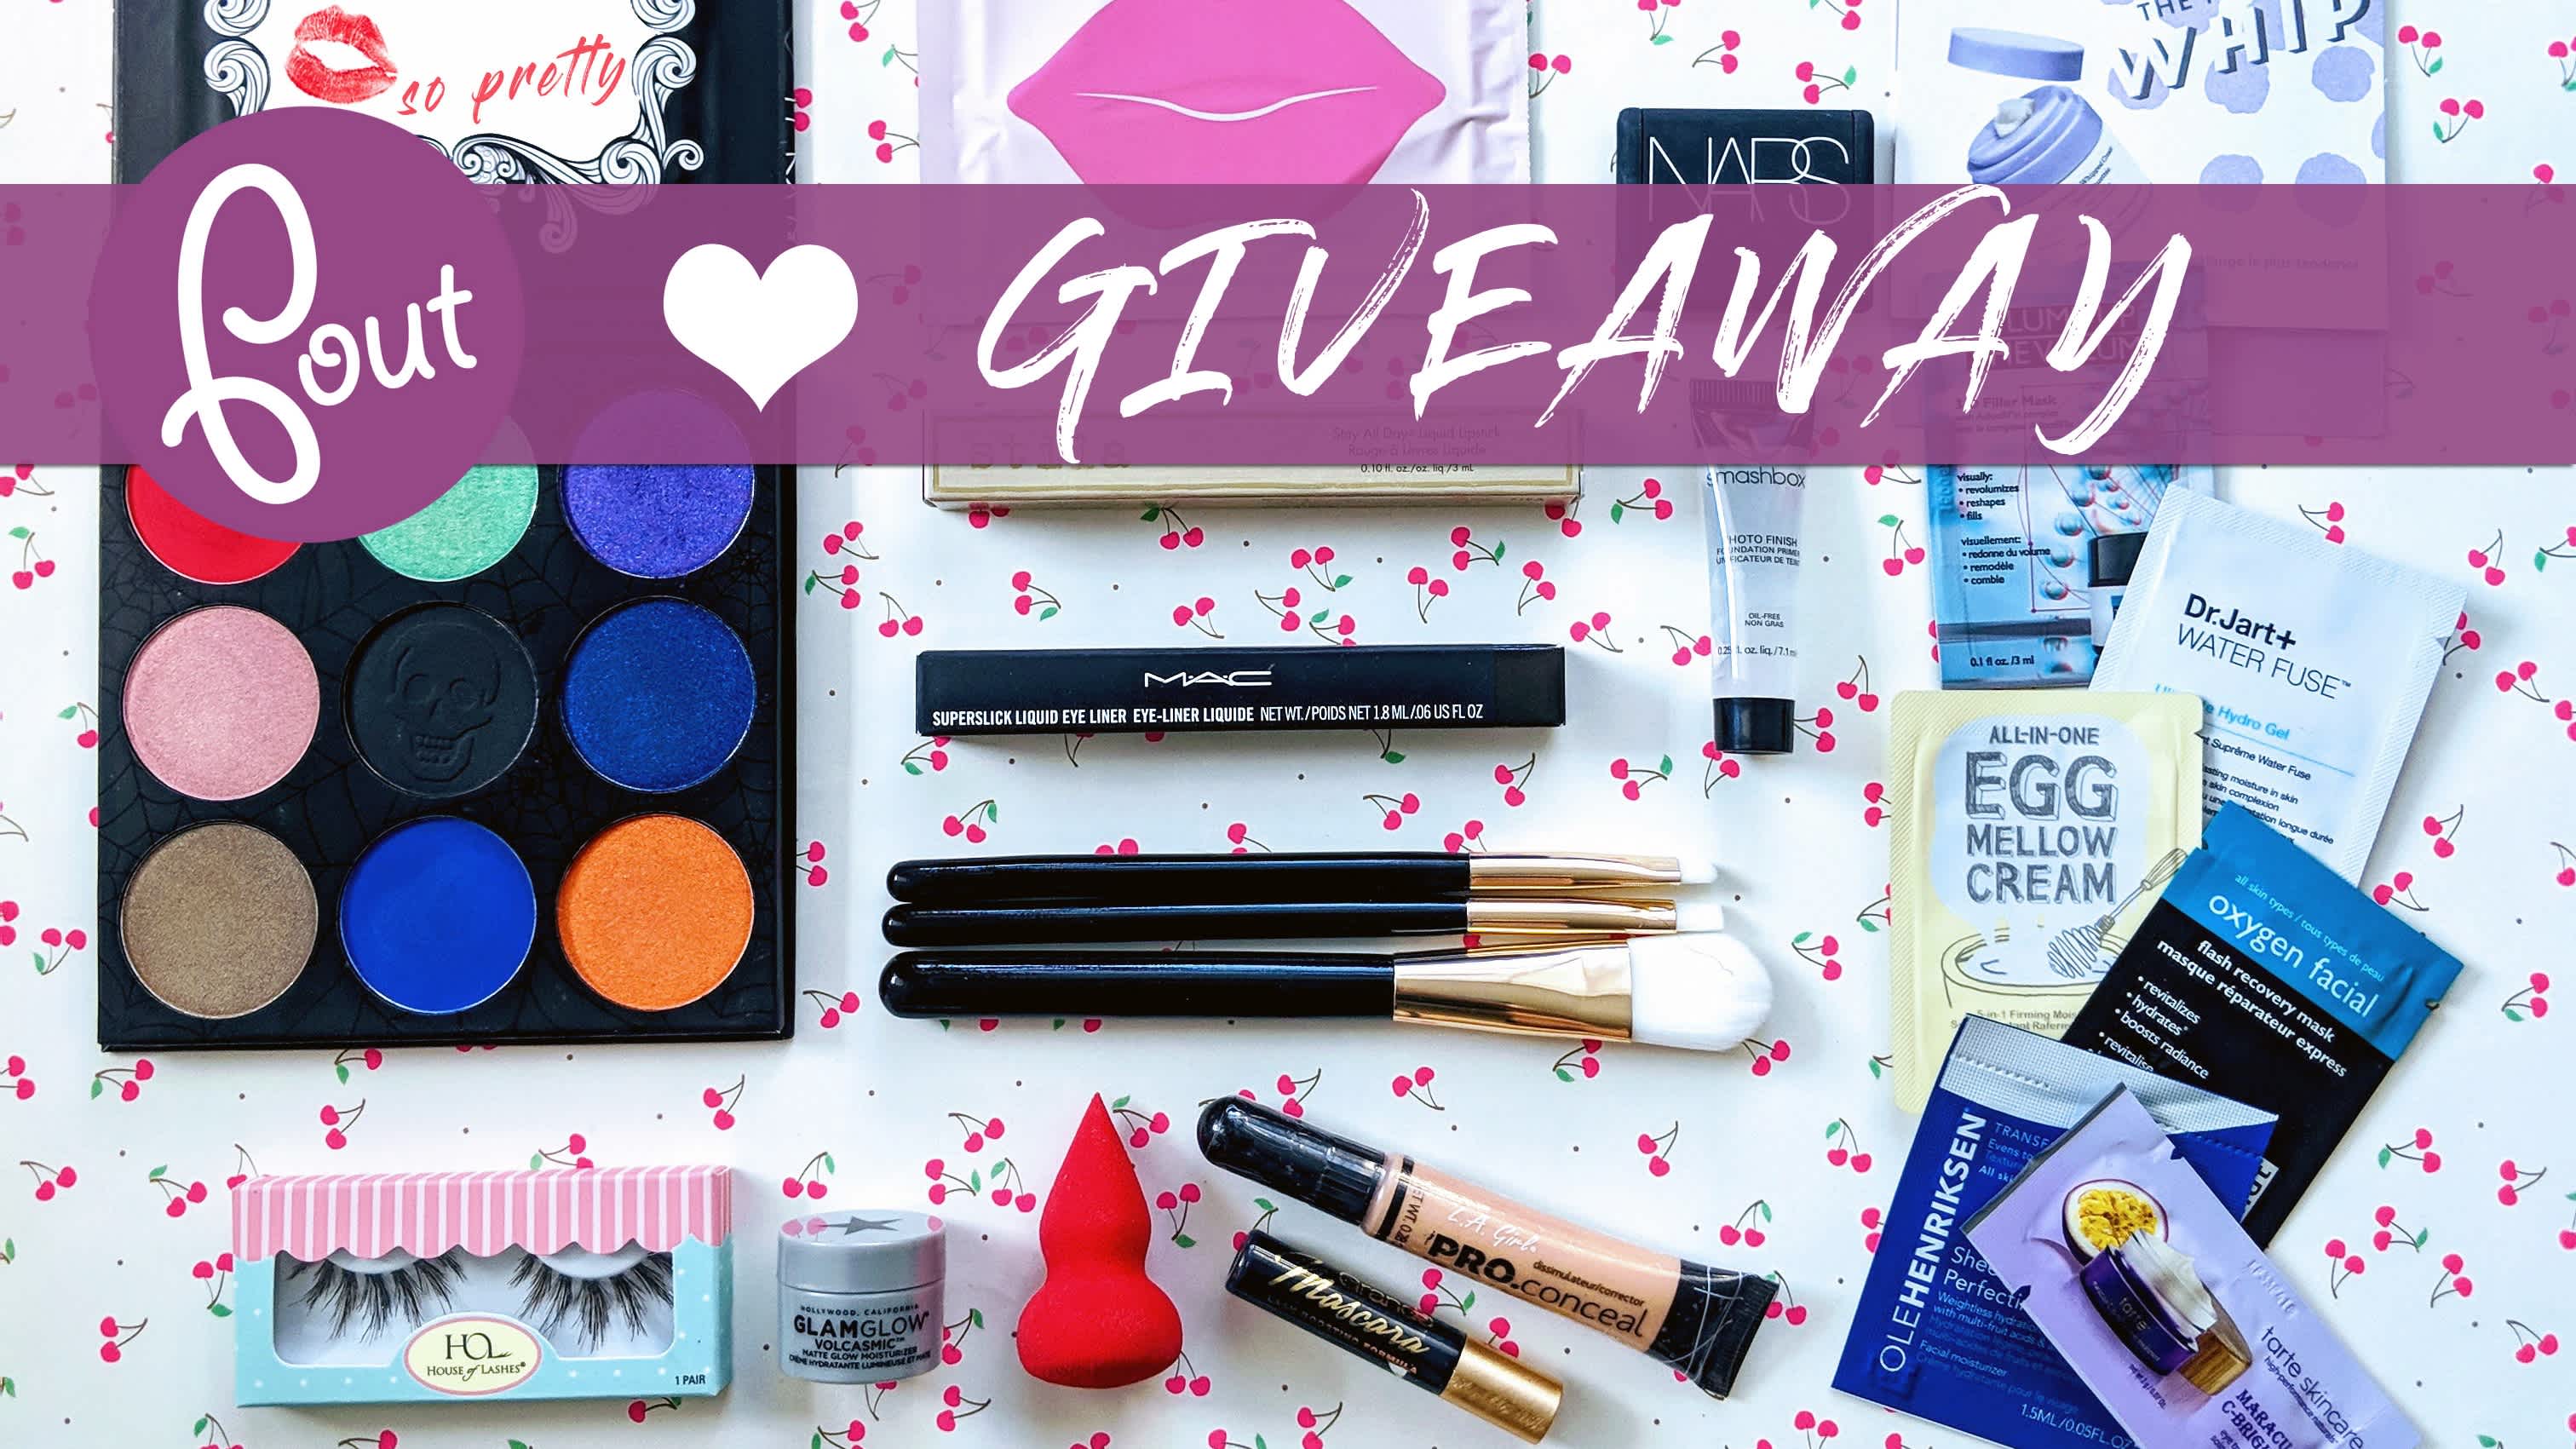 Pout So Pretty October 2018 Beauty GIVEAWAY!